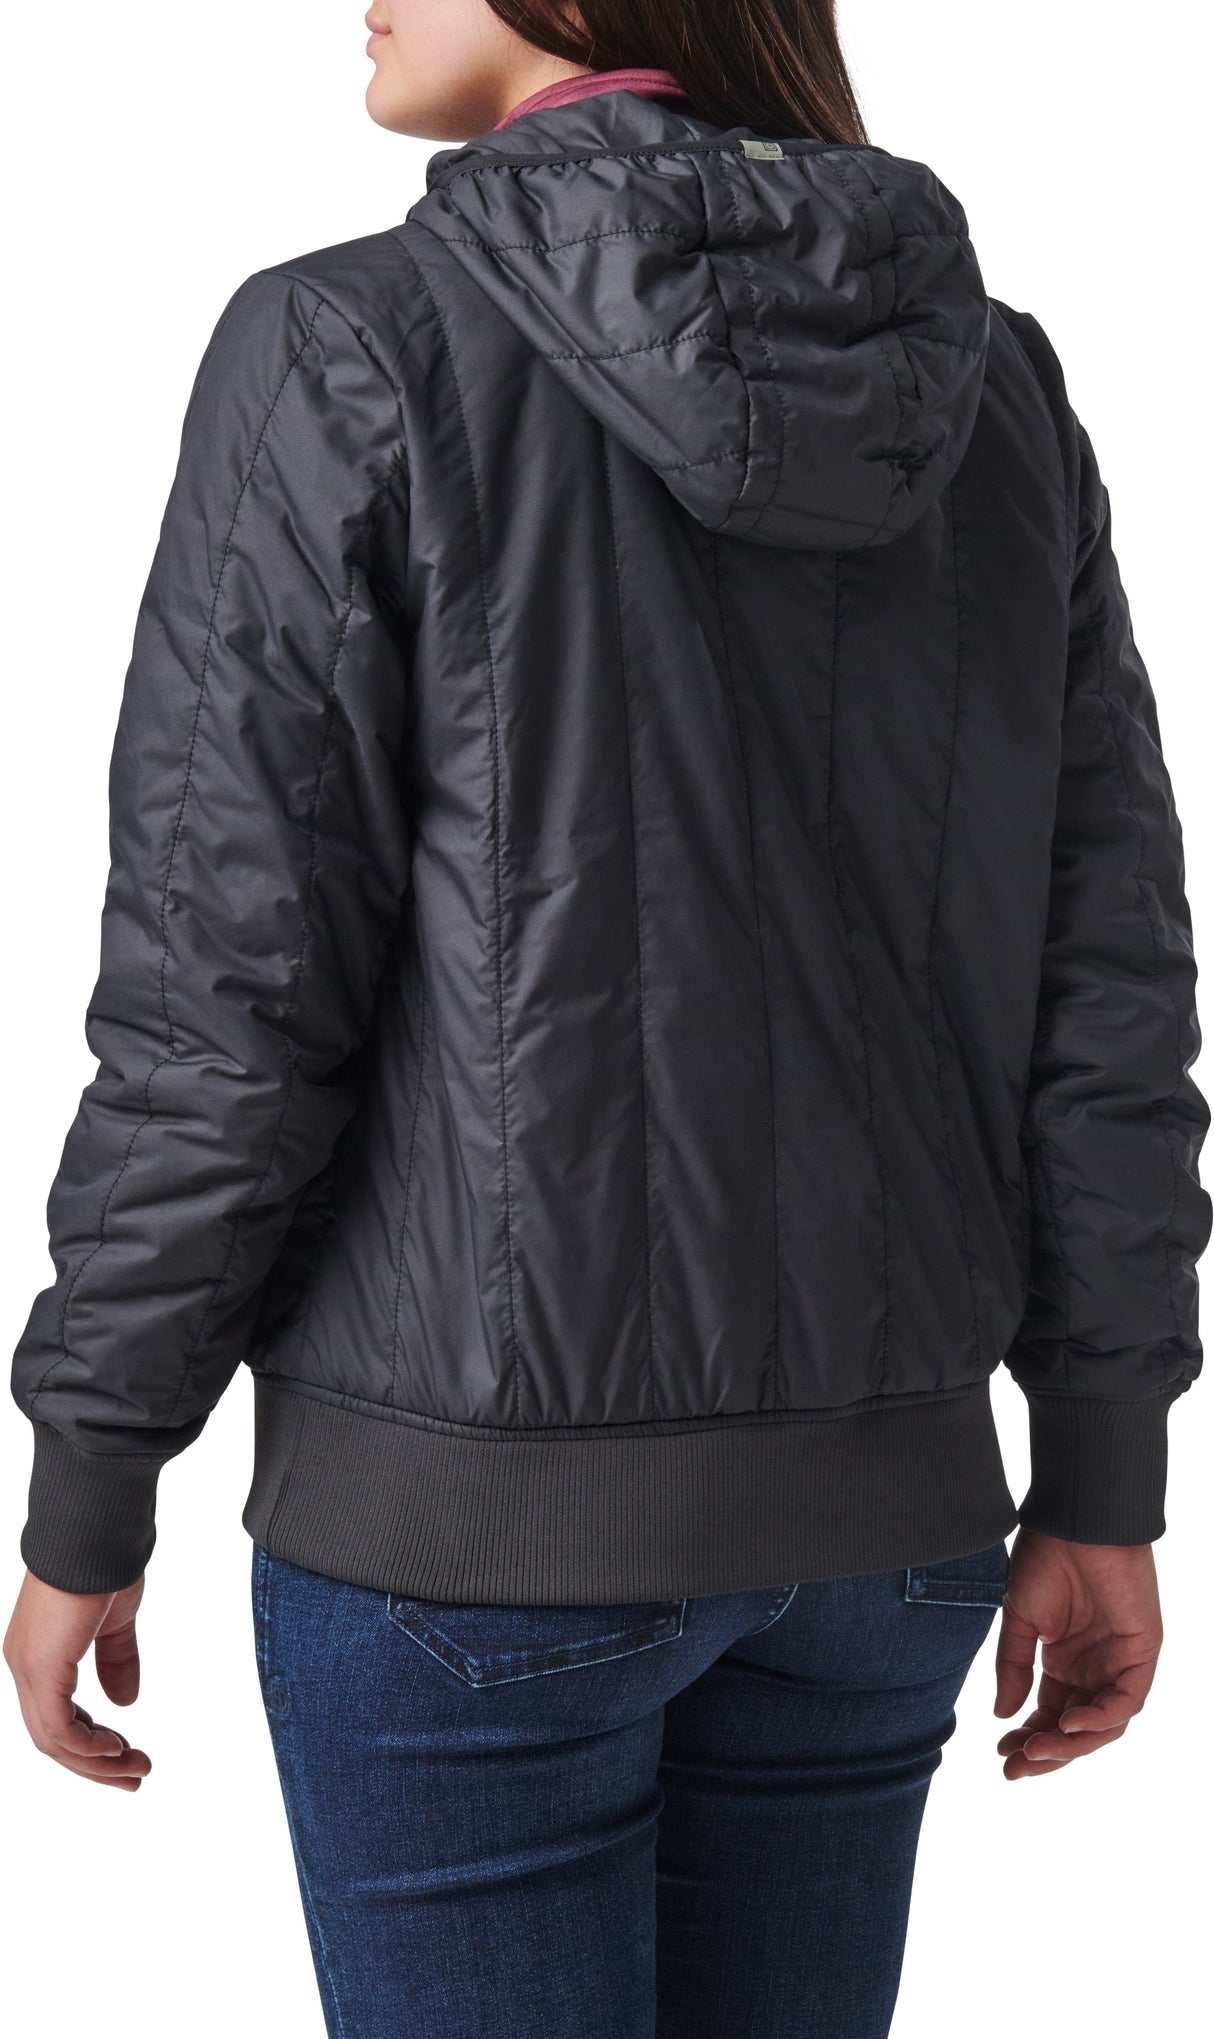 THERMEES INSULATOR JACKET